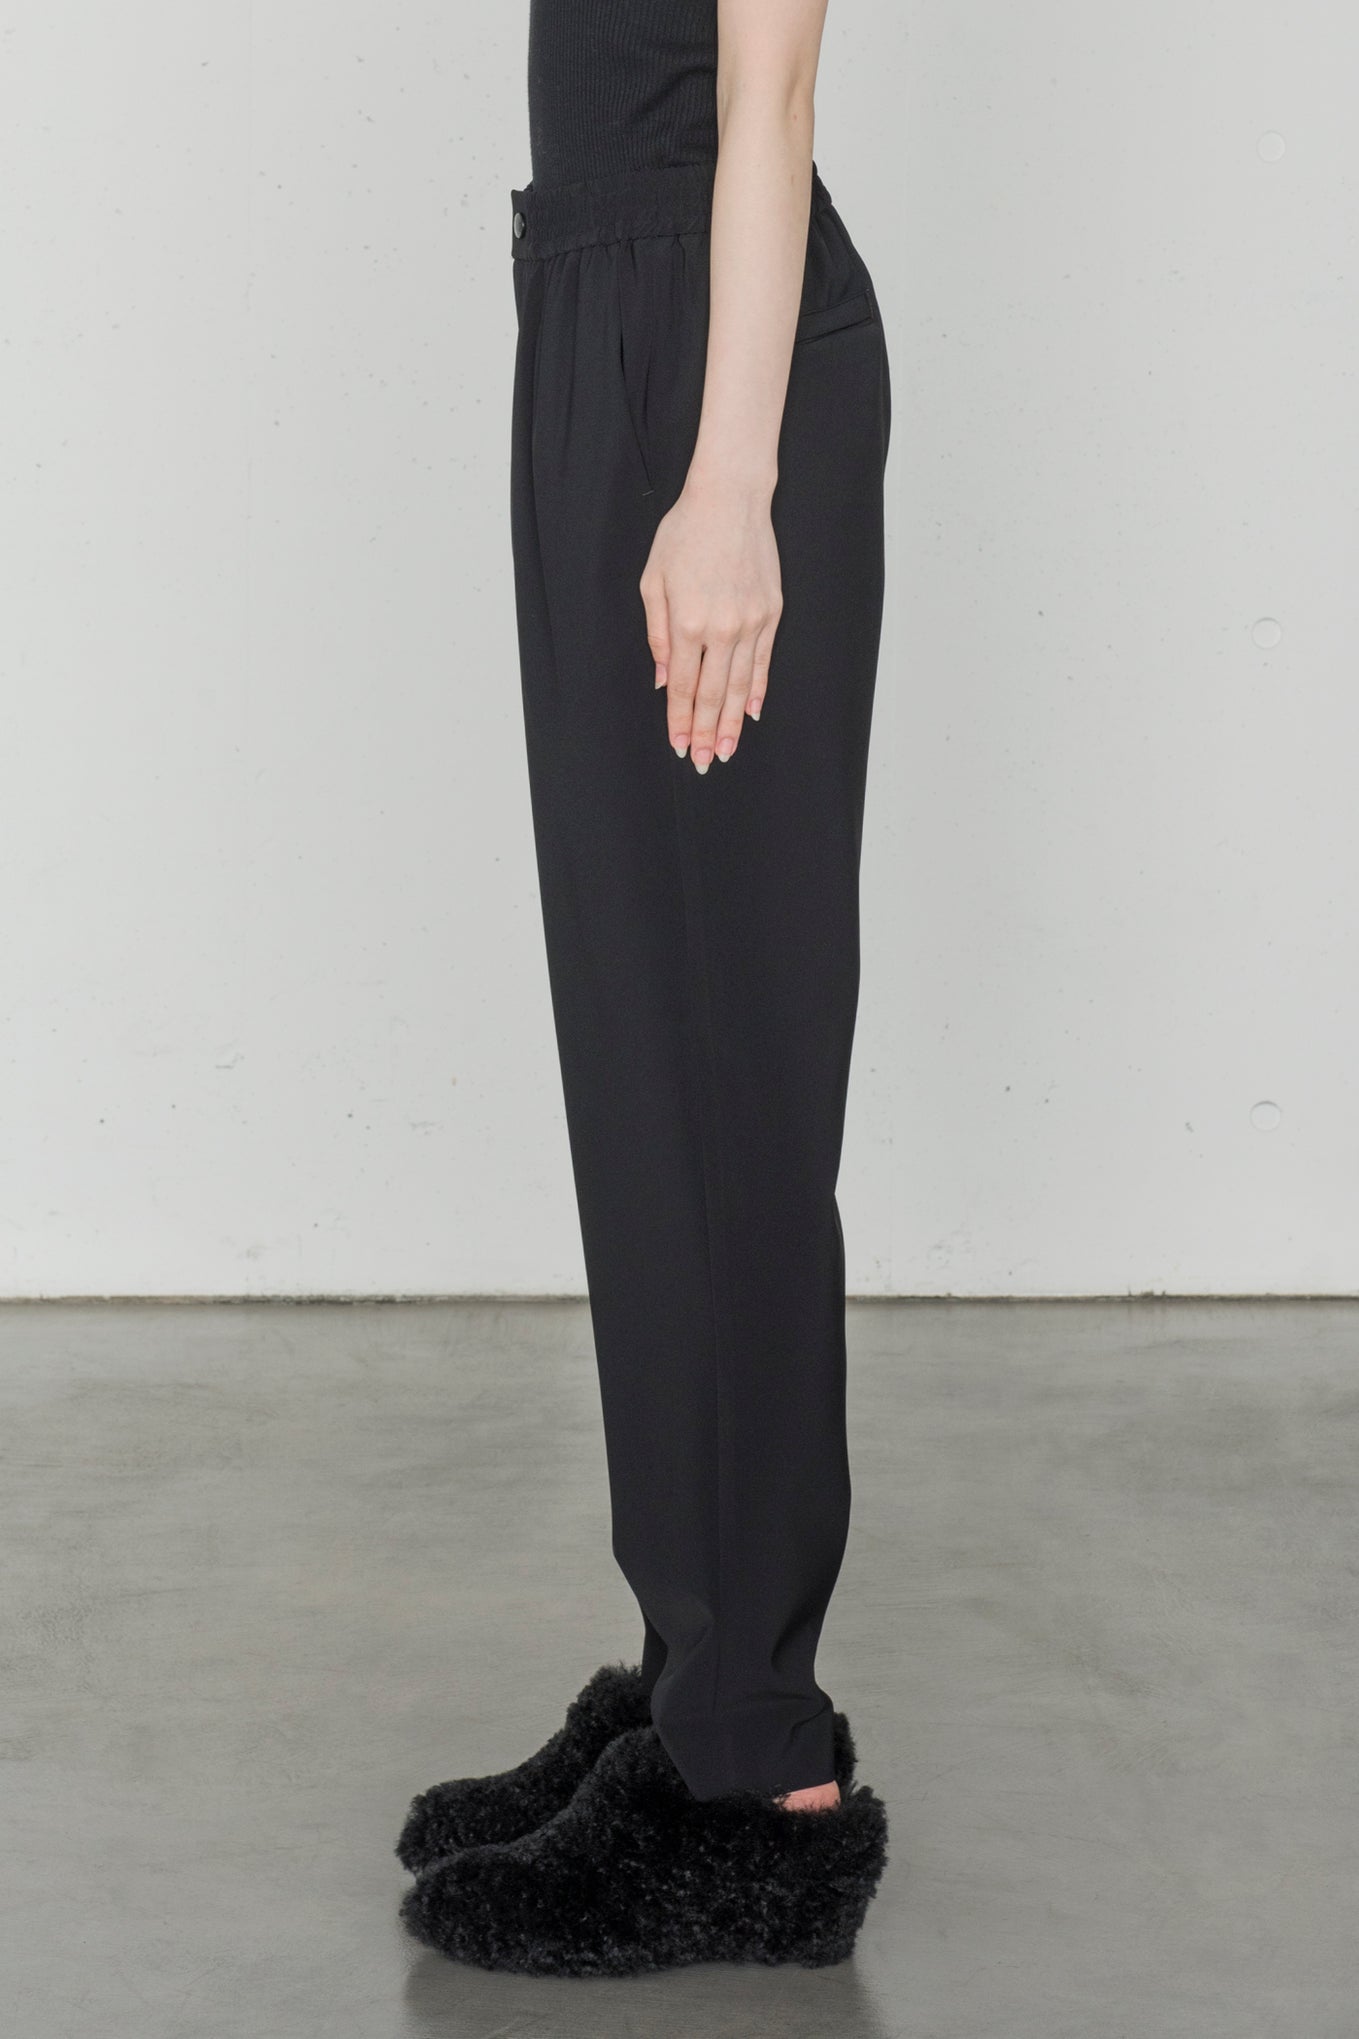 STRETCH TAPERED PANTS